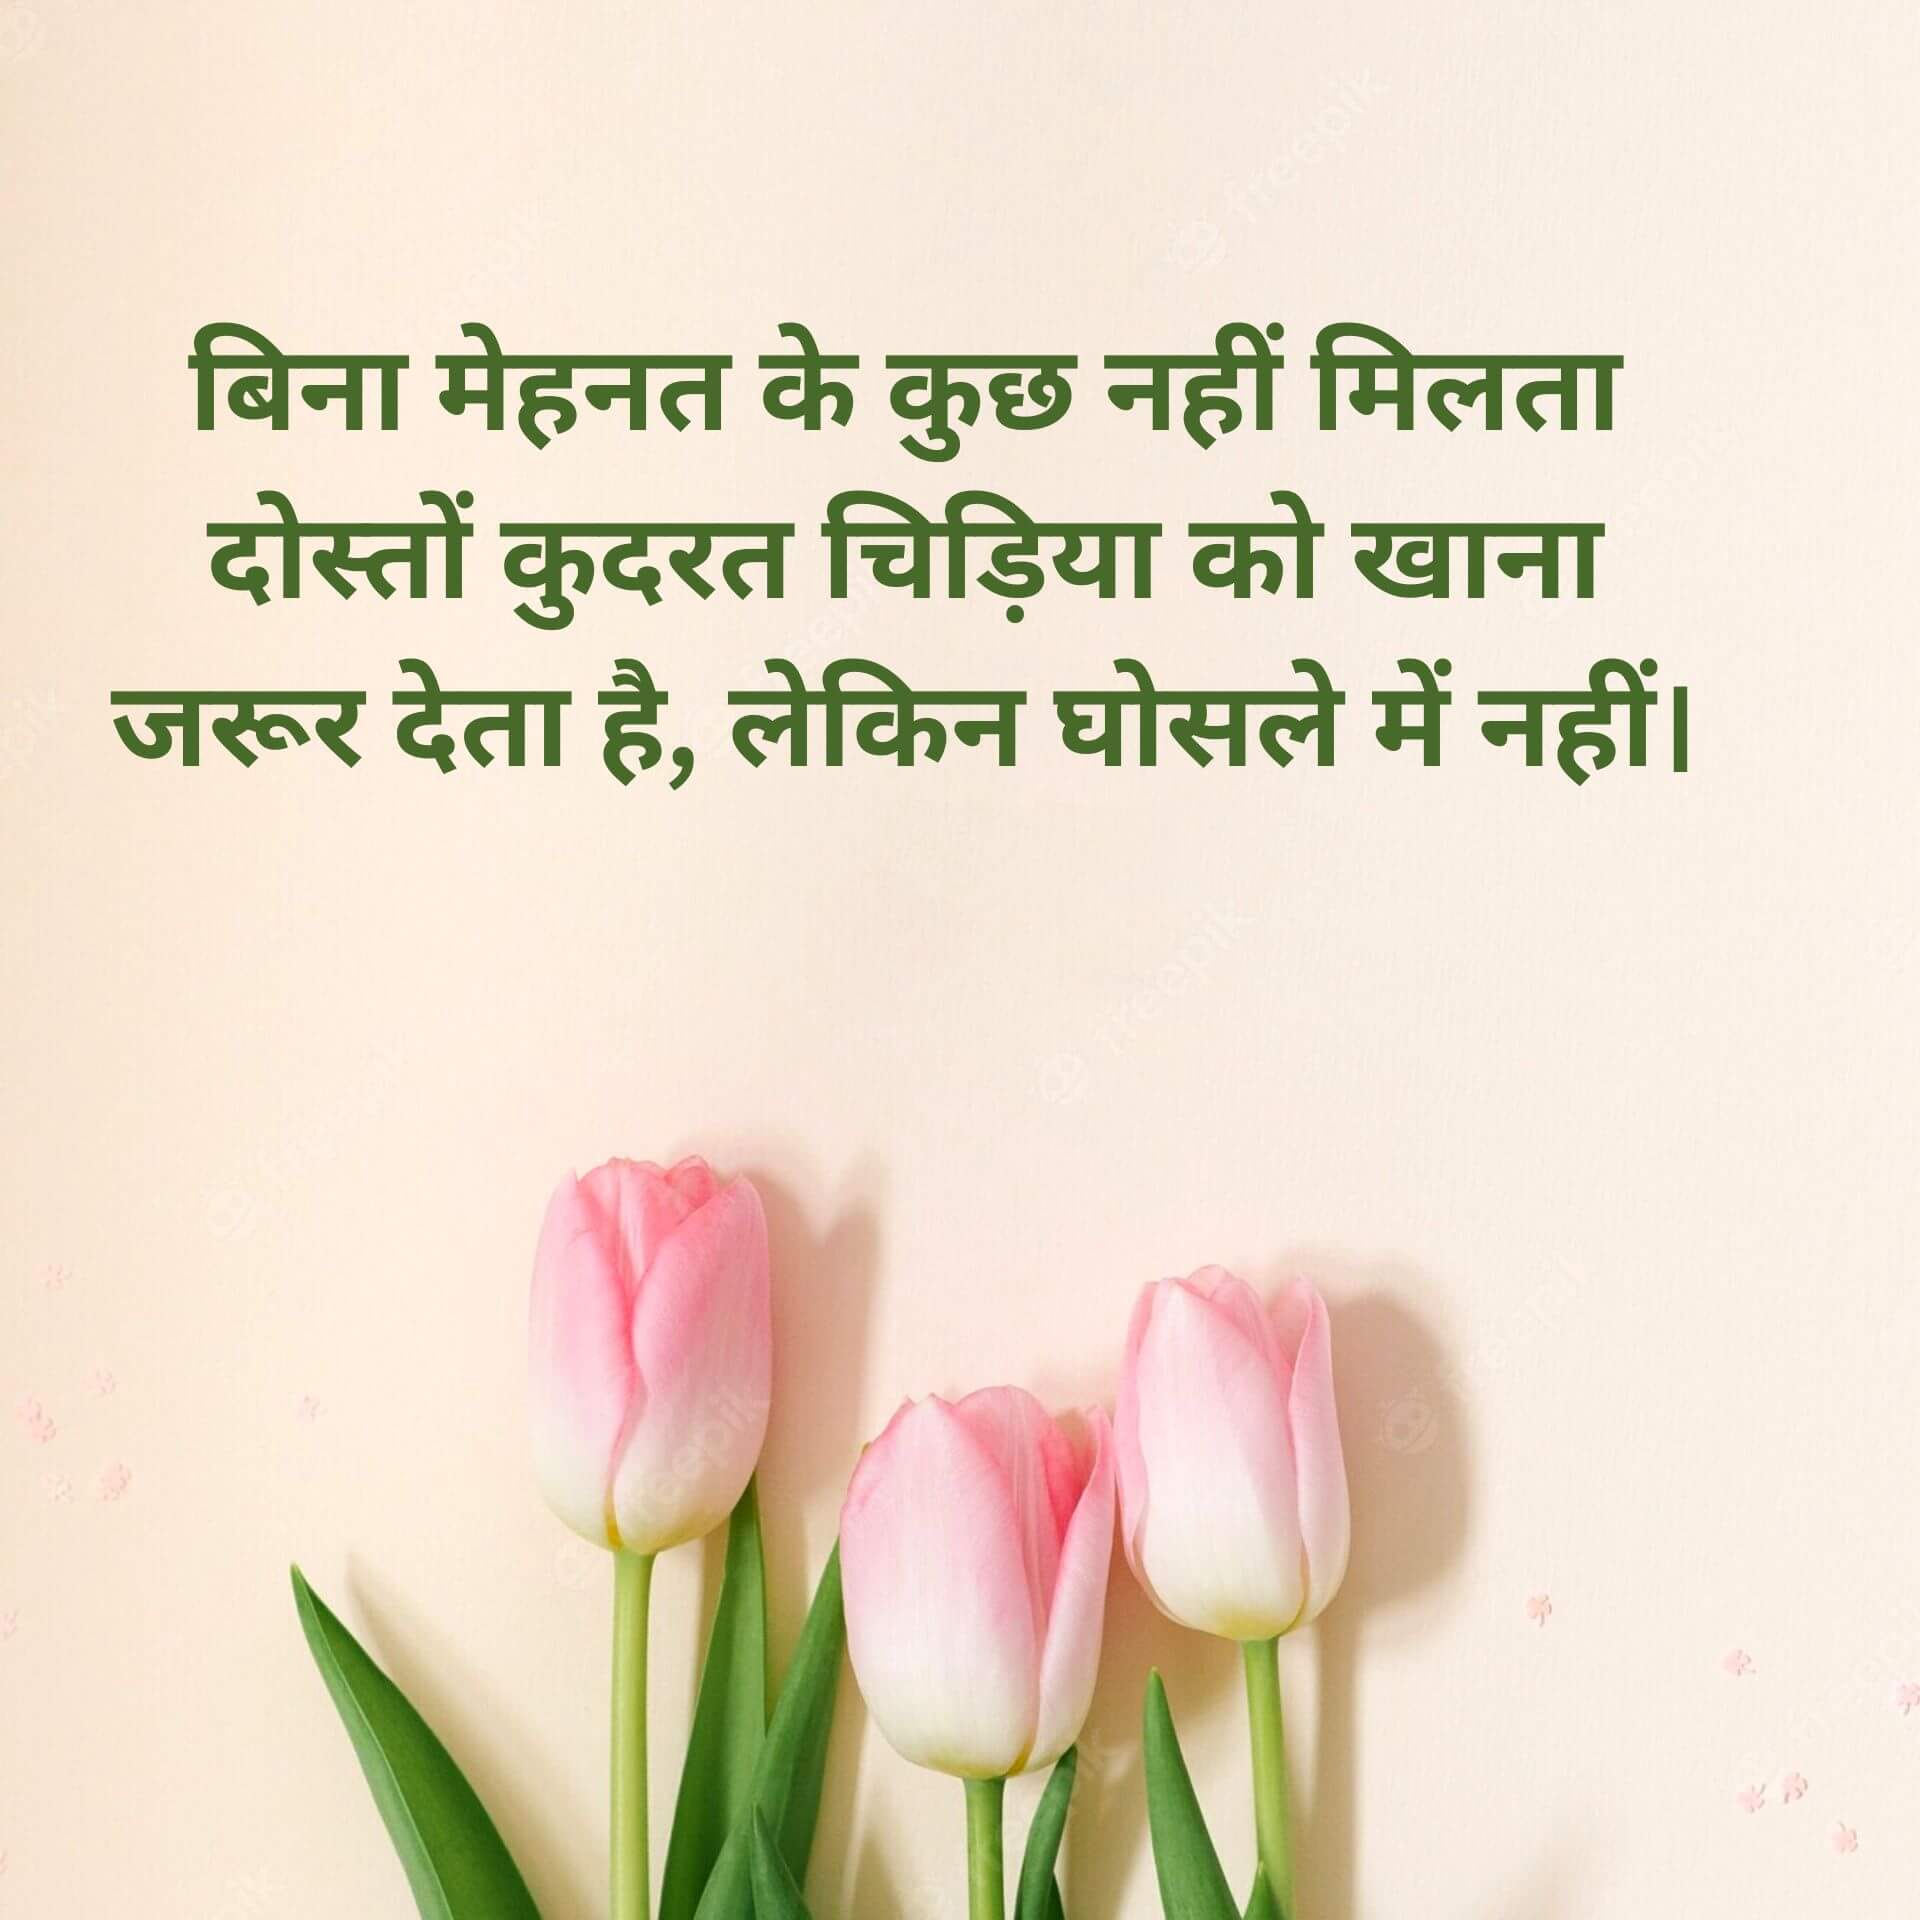 111+ Hindi Motivational Quotes Images For Whatsapp Download